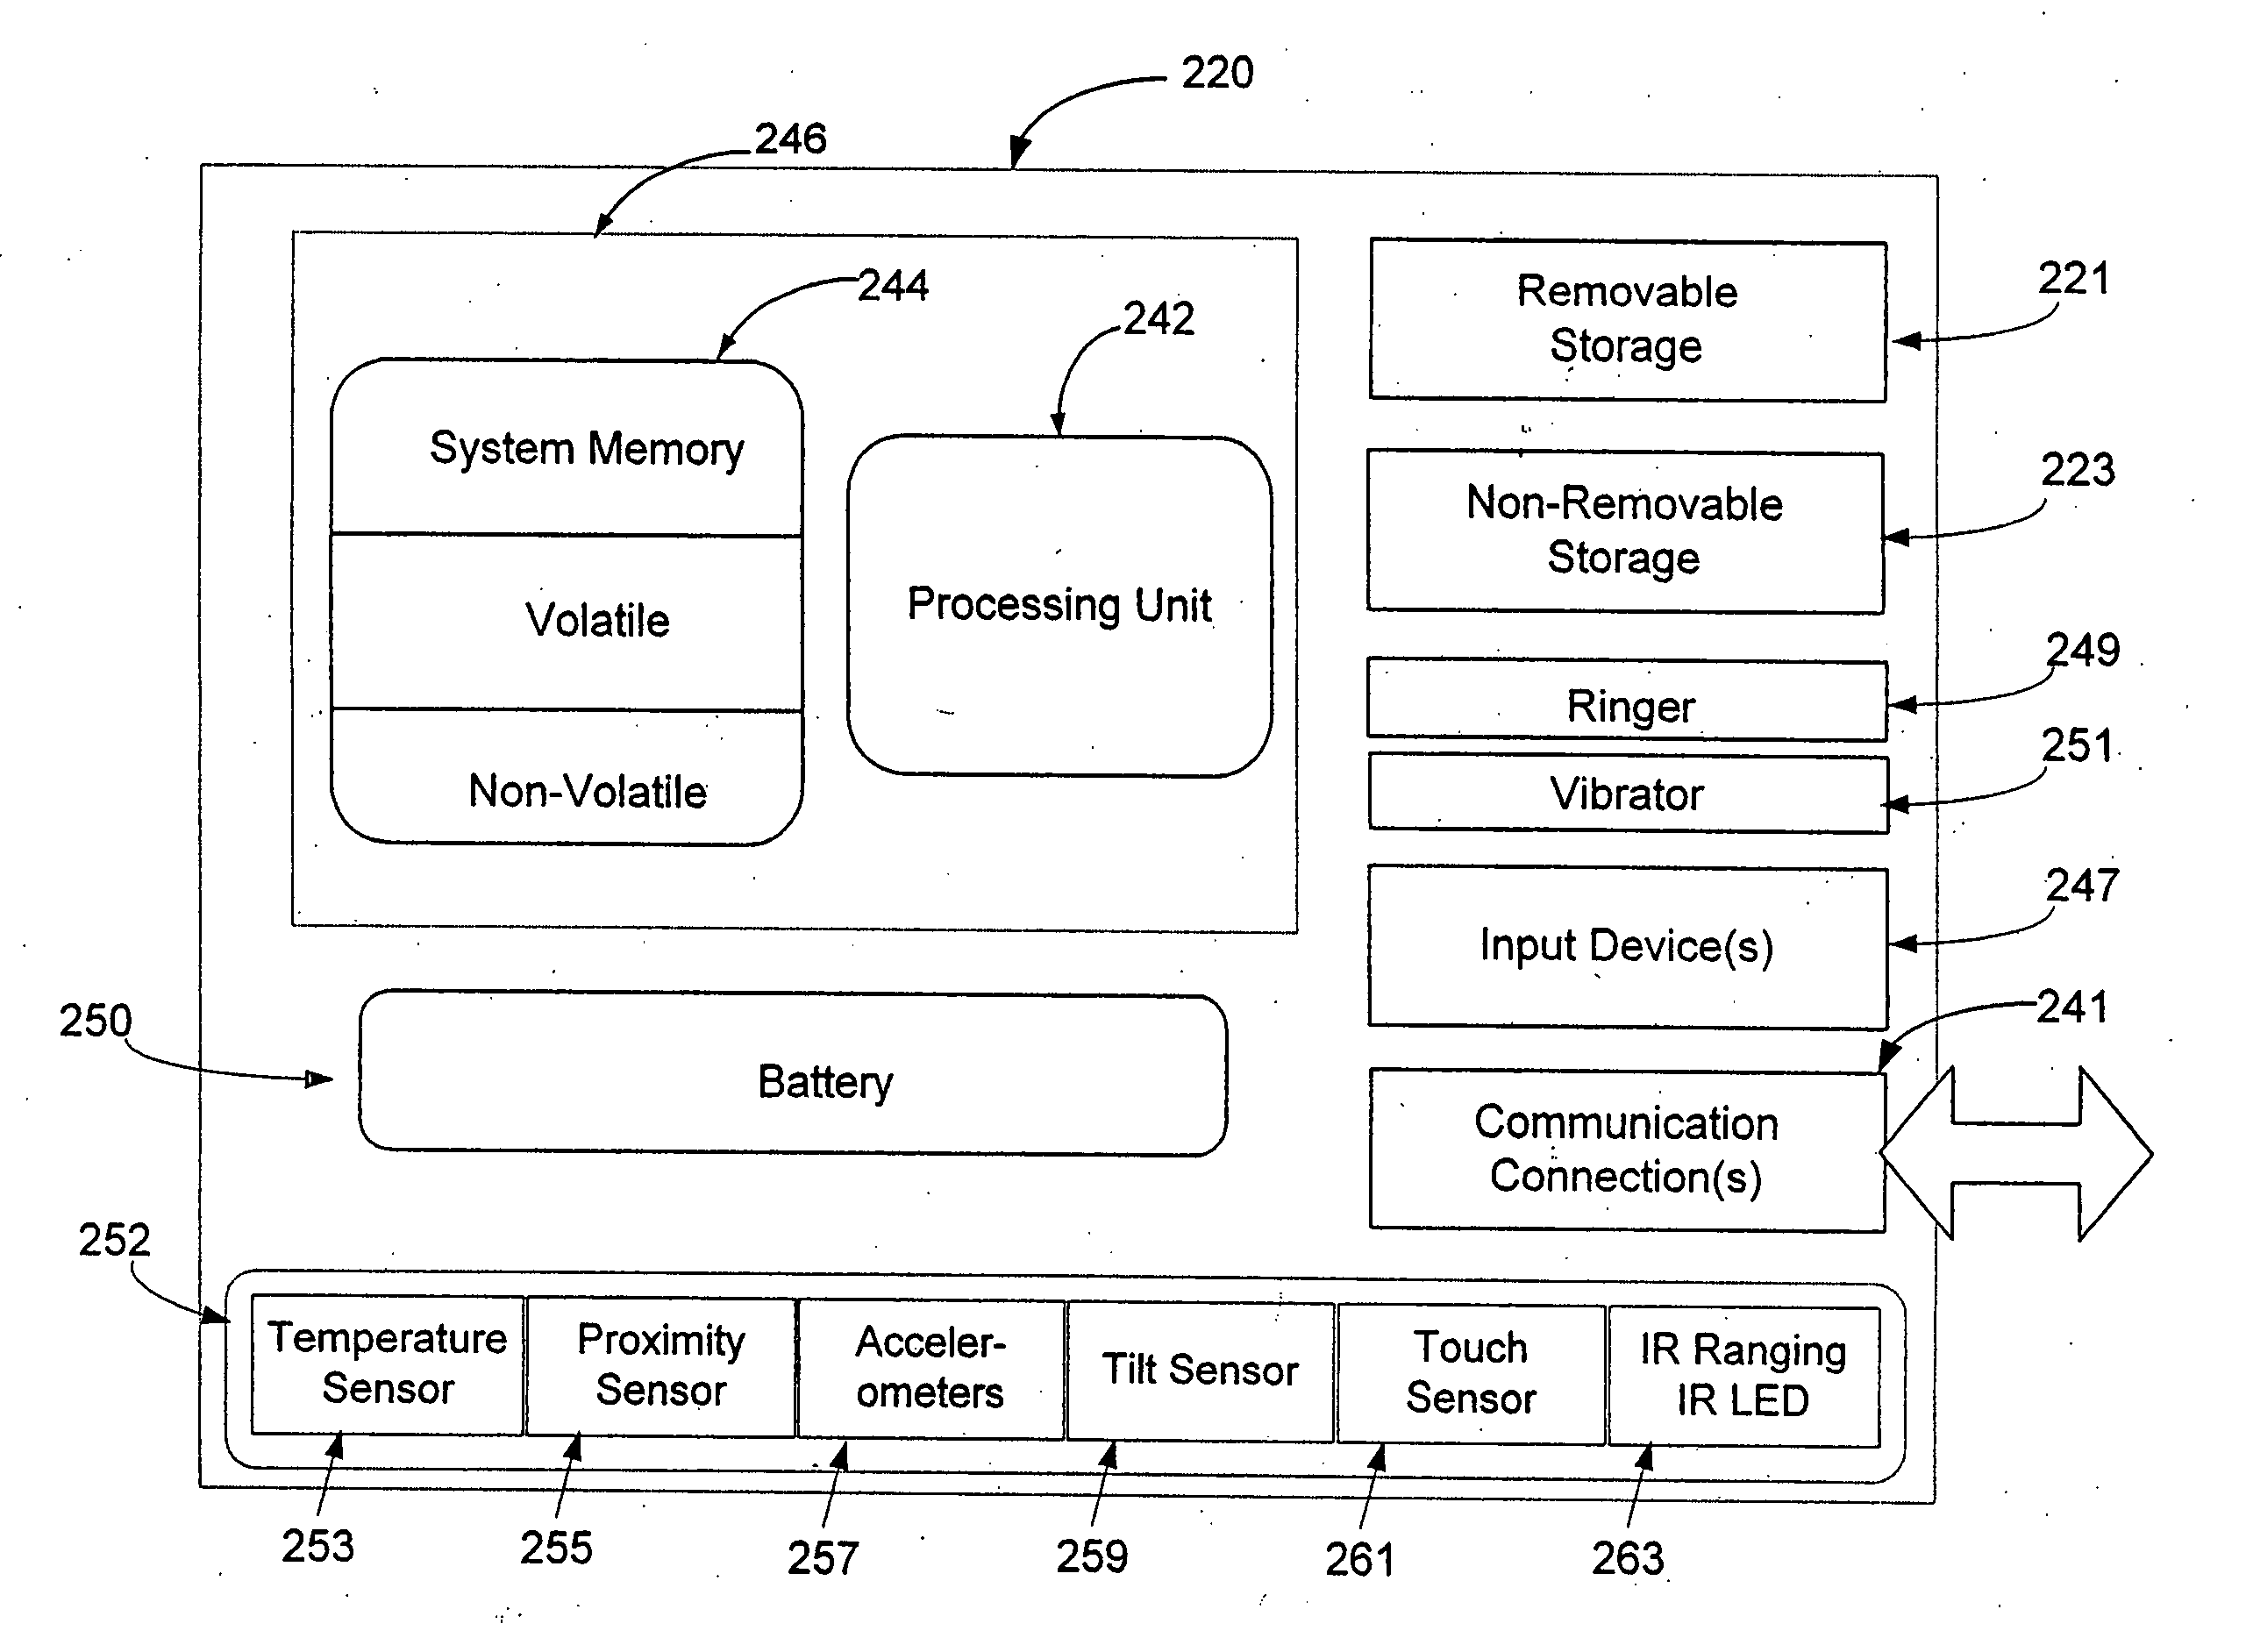 Reducing power consumption in a networked battery-operated device using sensors